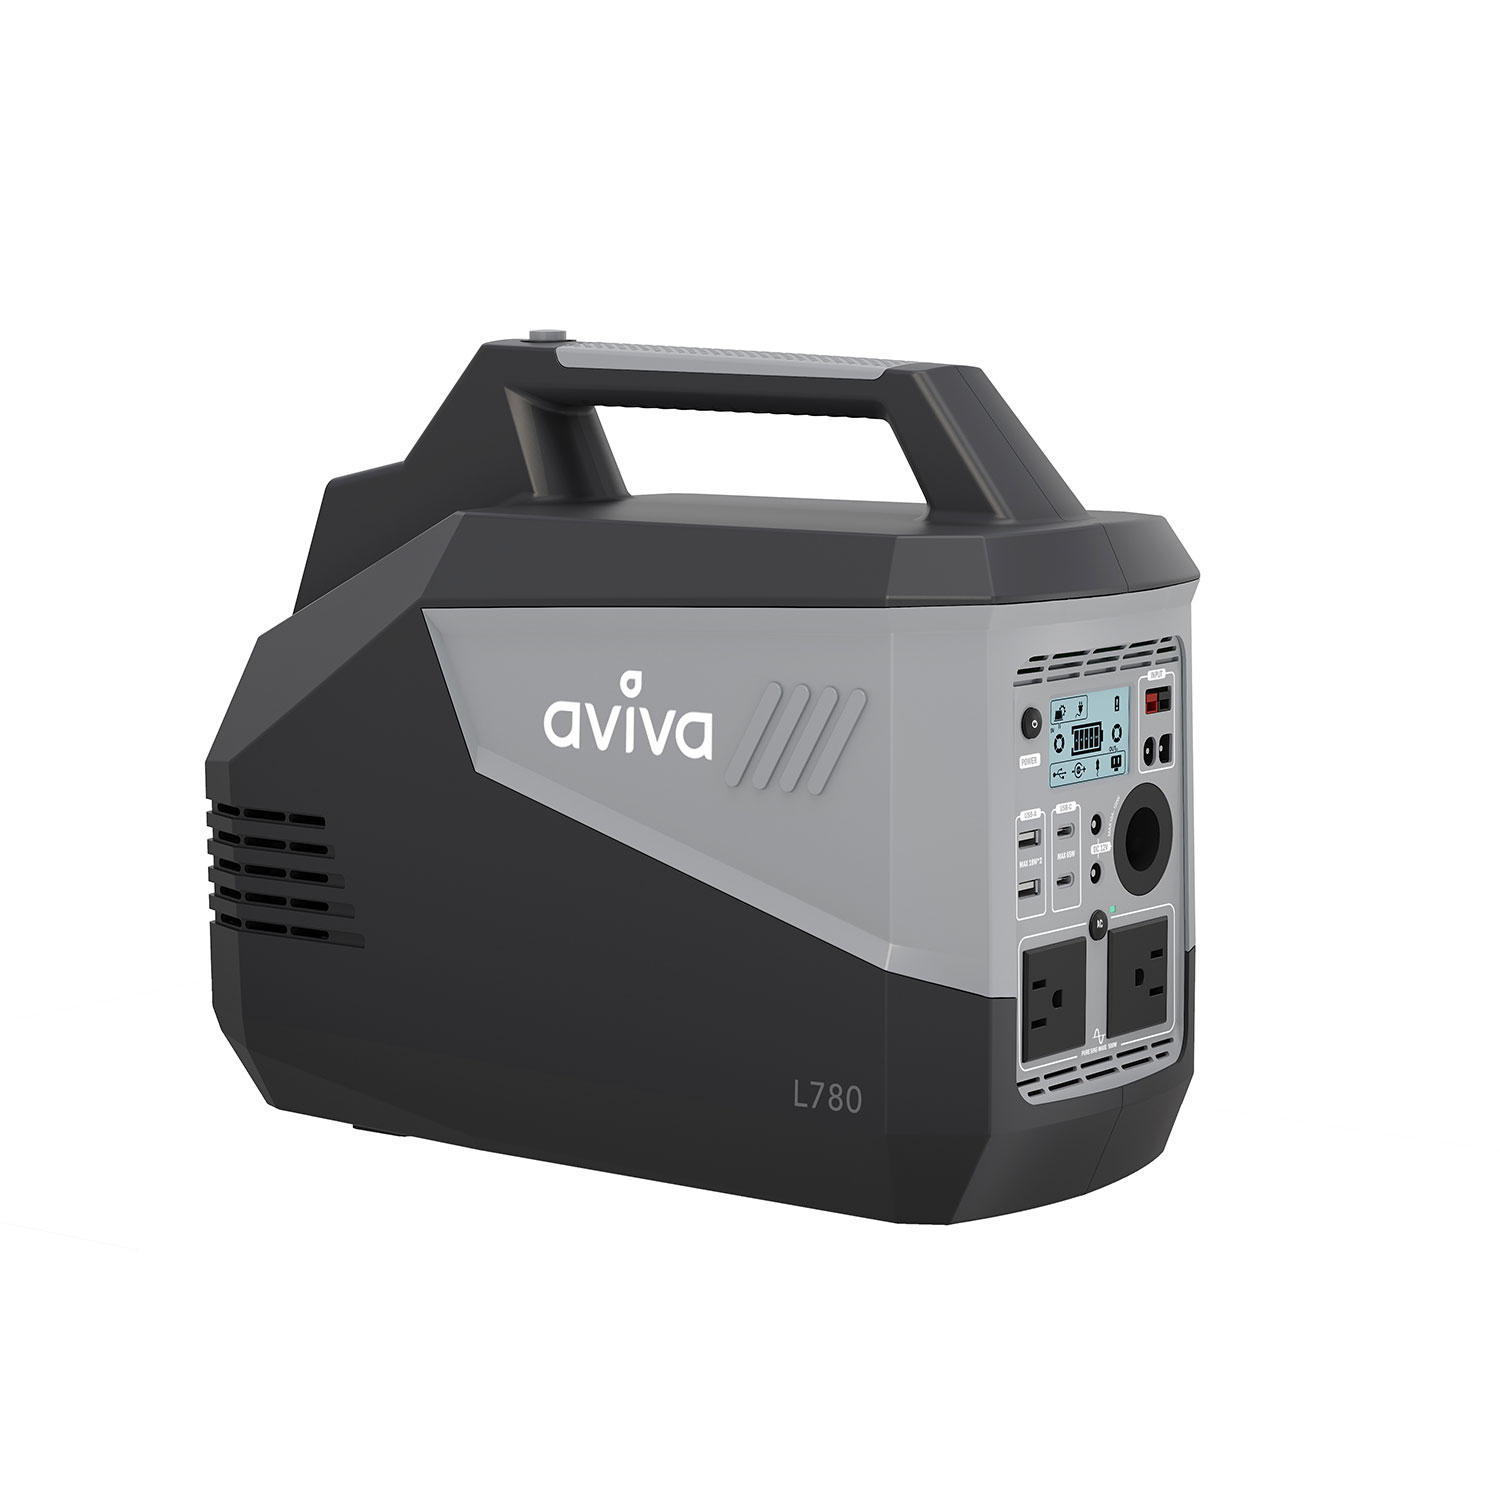 Aviva L780 Portable Power Station, 786 Wh Portable Lithium-Ion Battery, Supports 500 W Devices (2500 W Surge), Pure Sine